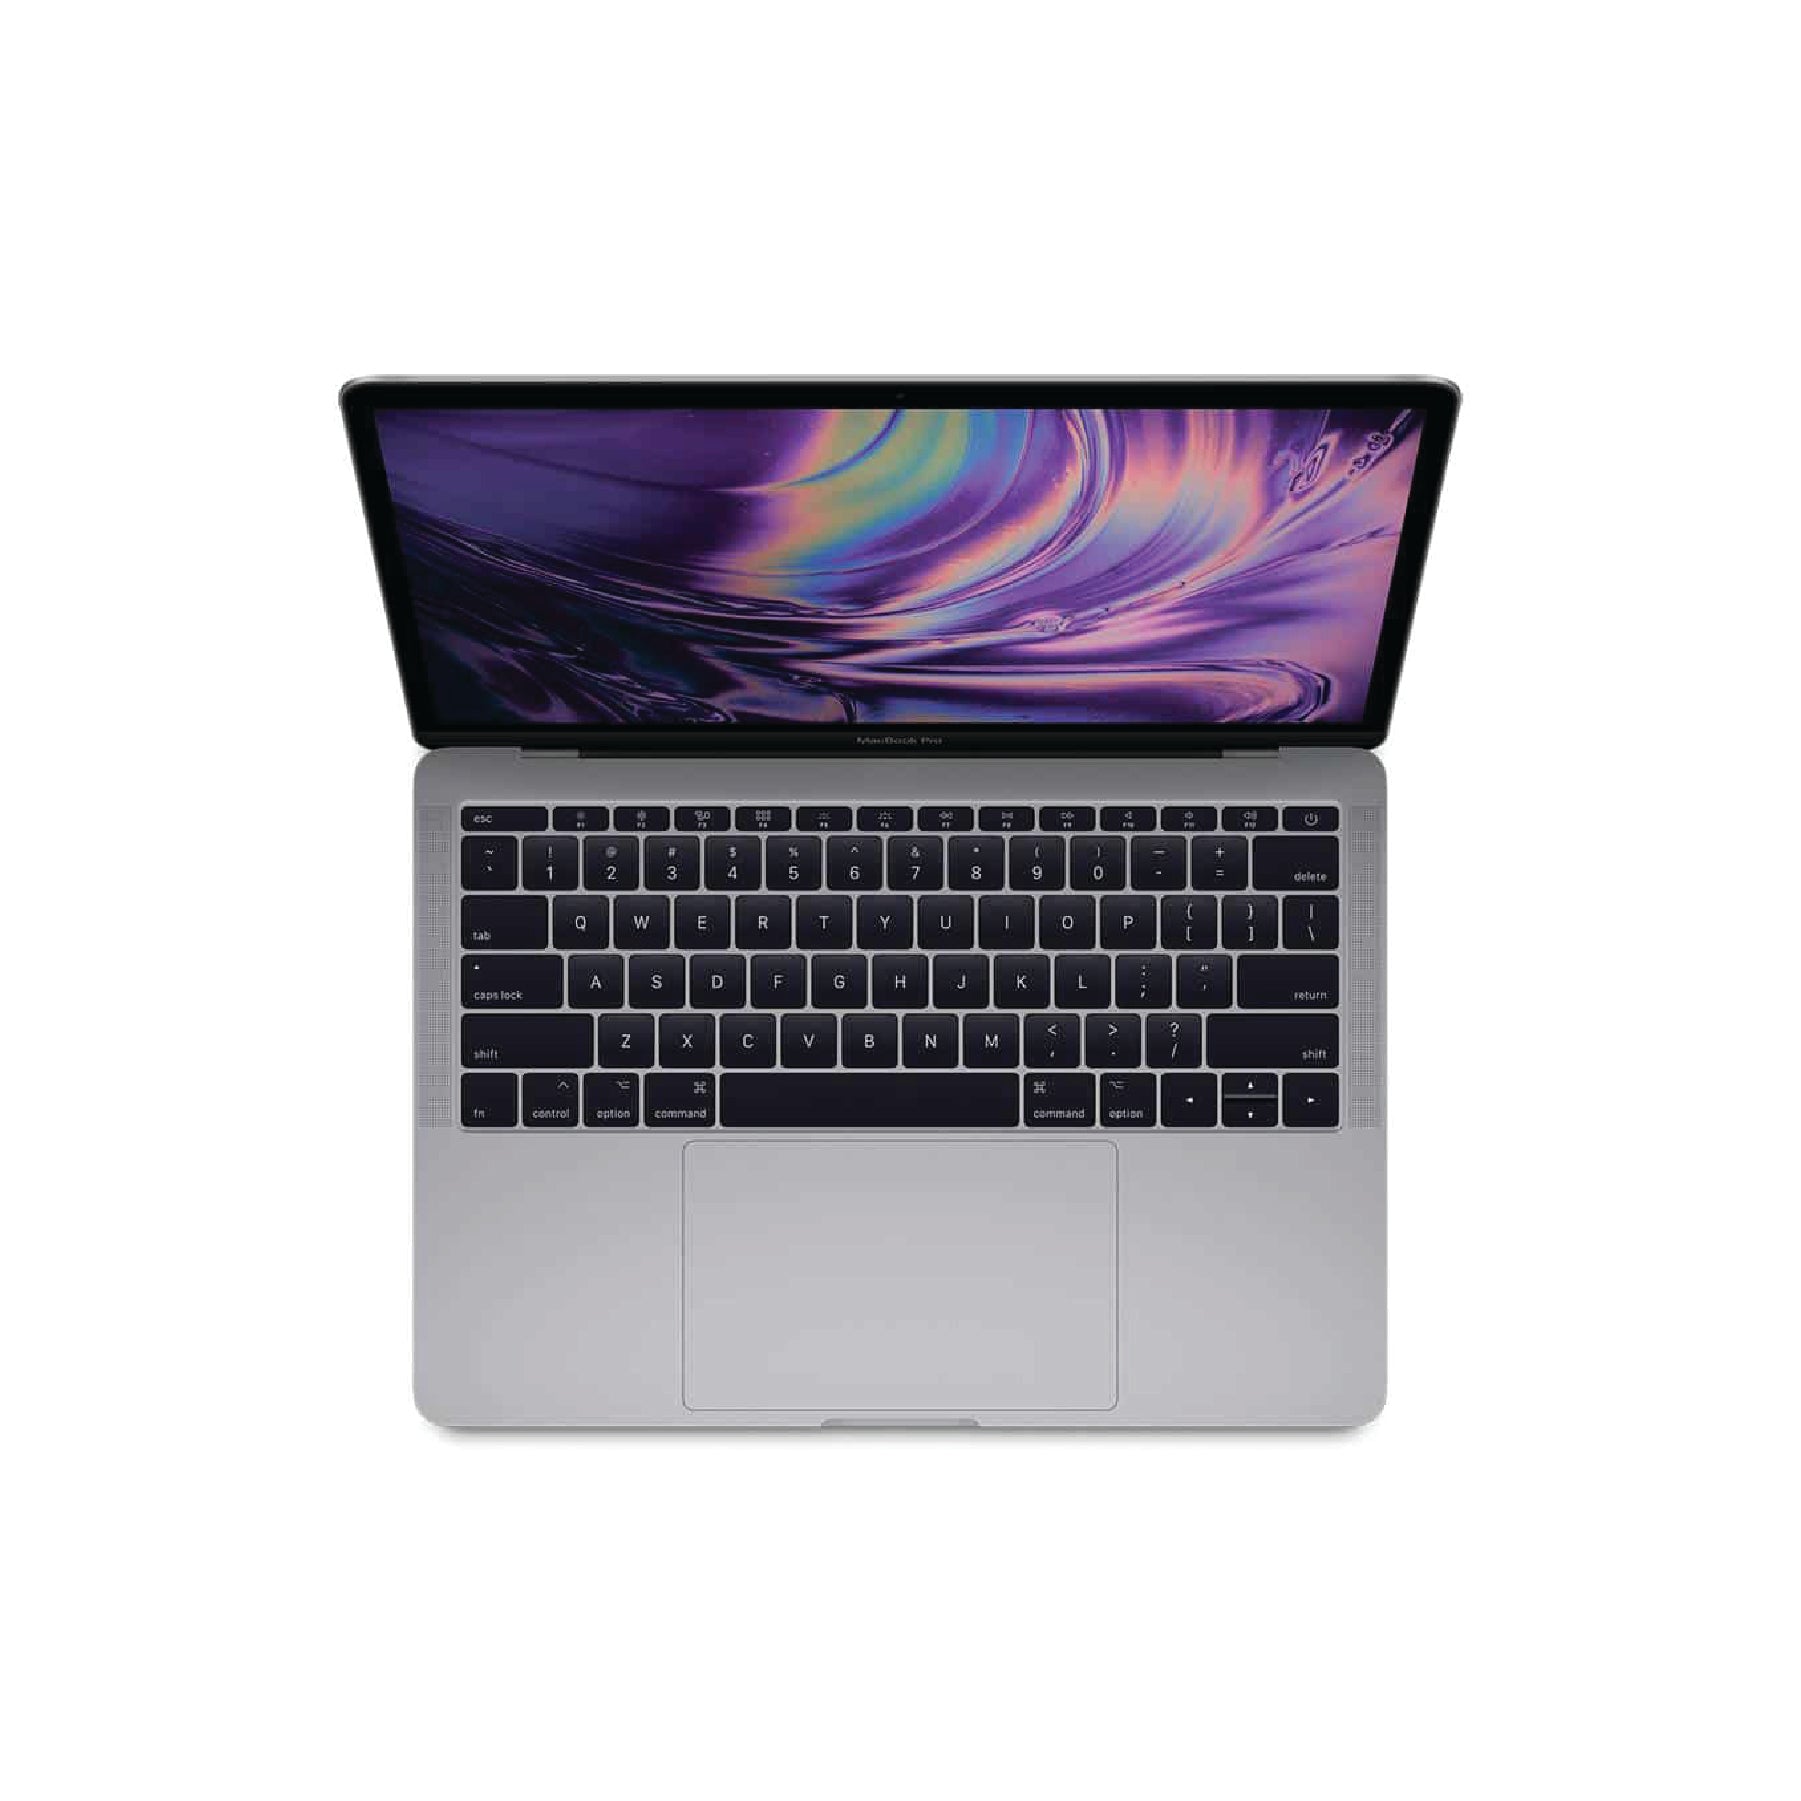 MacBook Pro (13-inch, 2017, Two Thunderbolt 3 ports) 2.3GHz, Intel Core i5 128GB - Space Grey (Best) - iStore Pre-owned